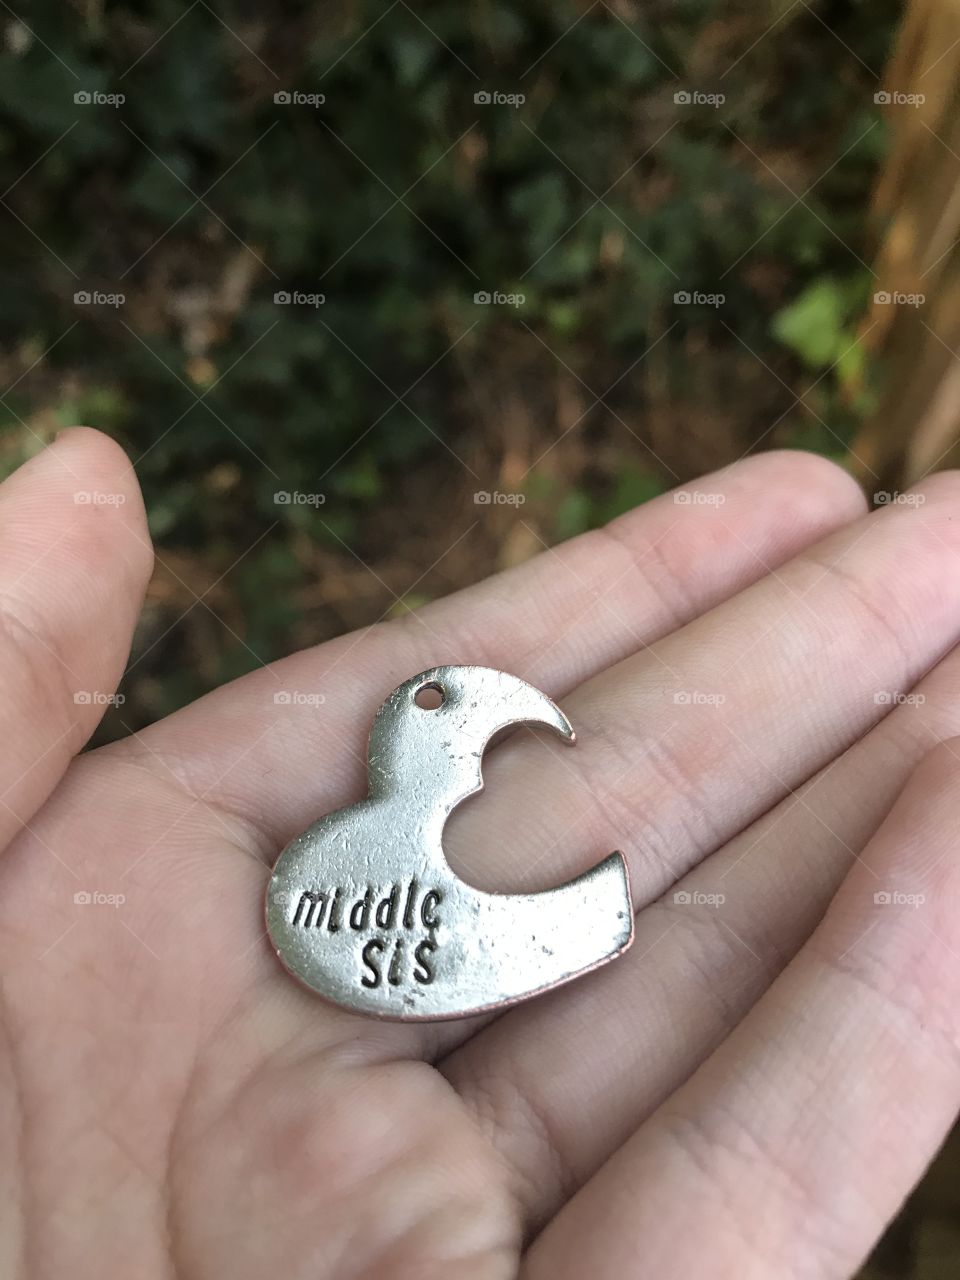 A person outside holding a heart-shaped silver charm reading “Middle Sis”